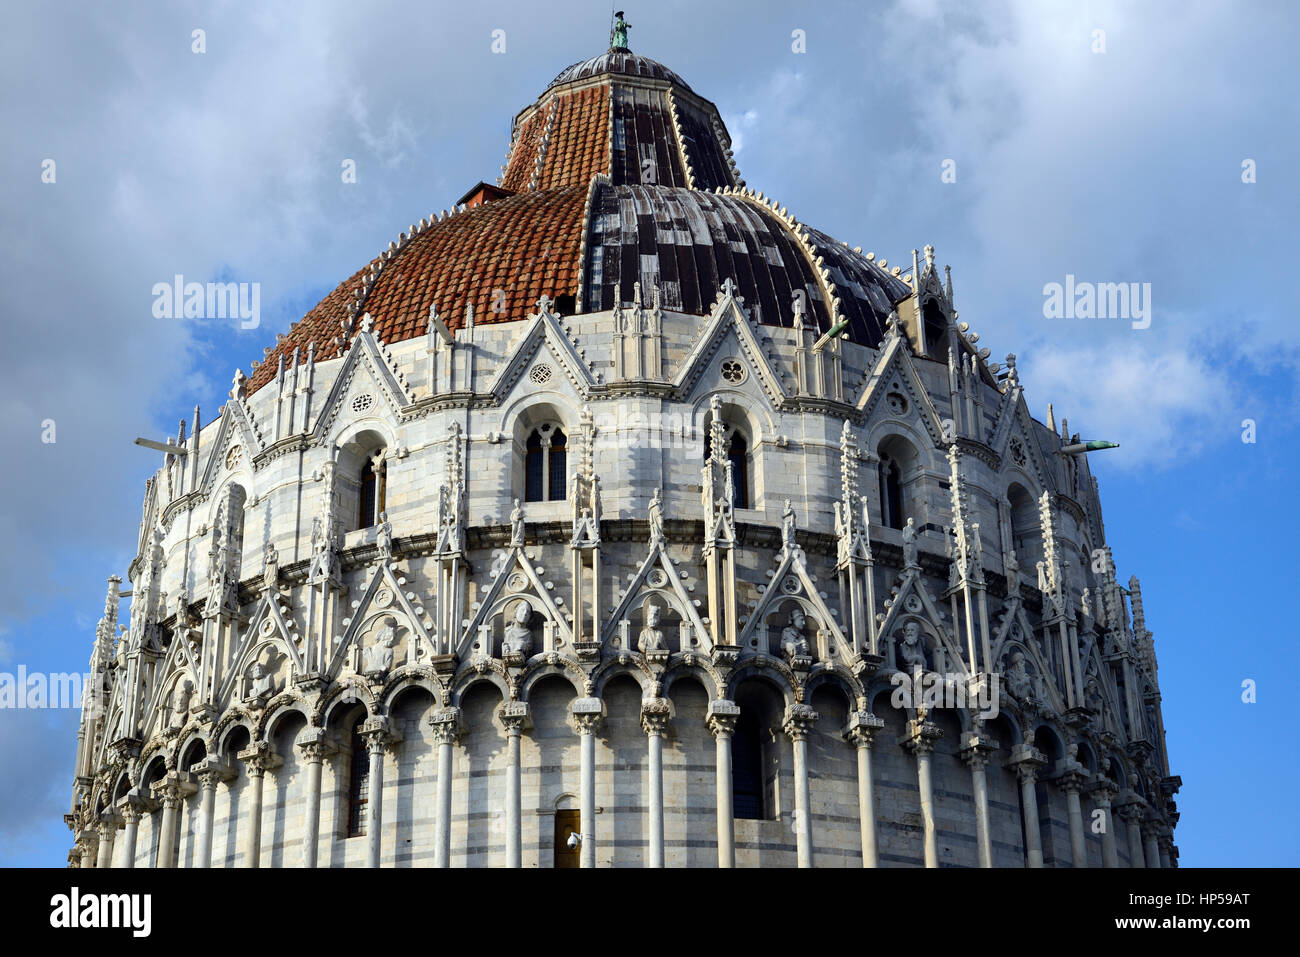 The Baptistery Duomo, Leaning Tower, Piazza dei Miracol,i Pisa, Italy, RM World, Stock Photo